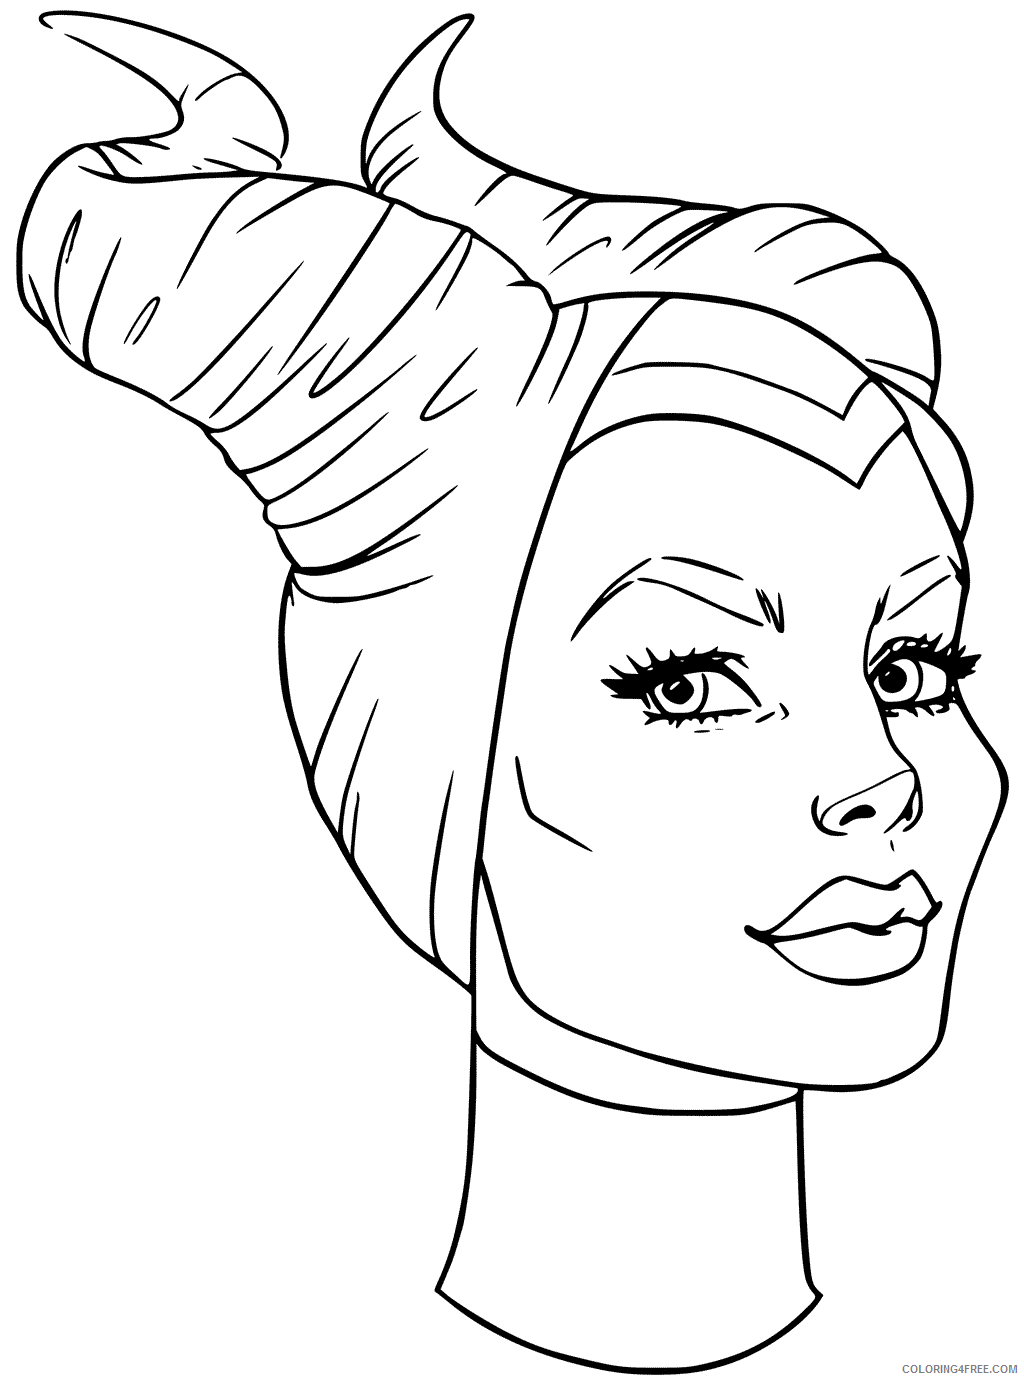 Maleficent Coloring Pages TV Film Maleficent Printable 2020 04834 Coloring4free